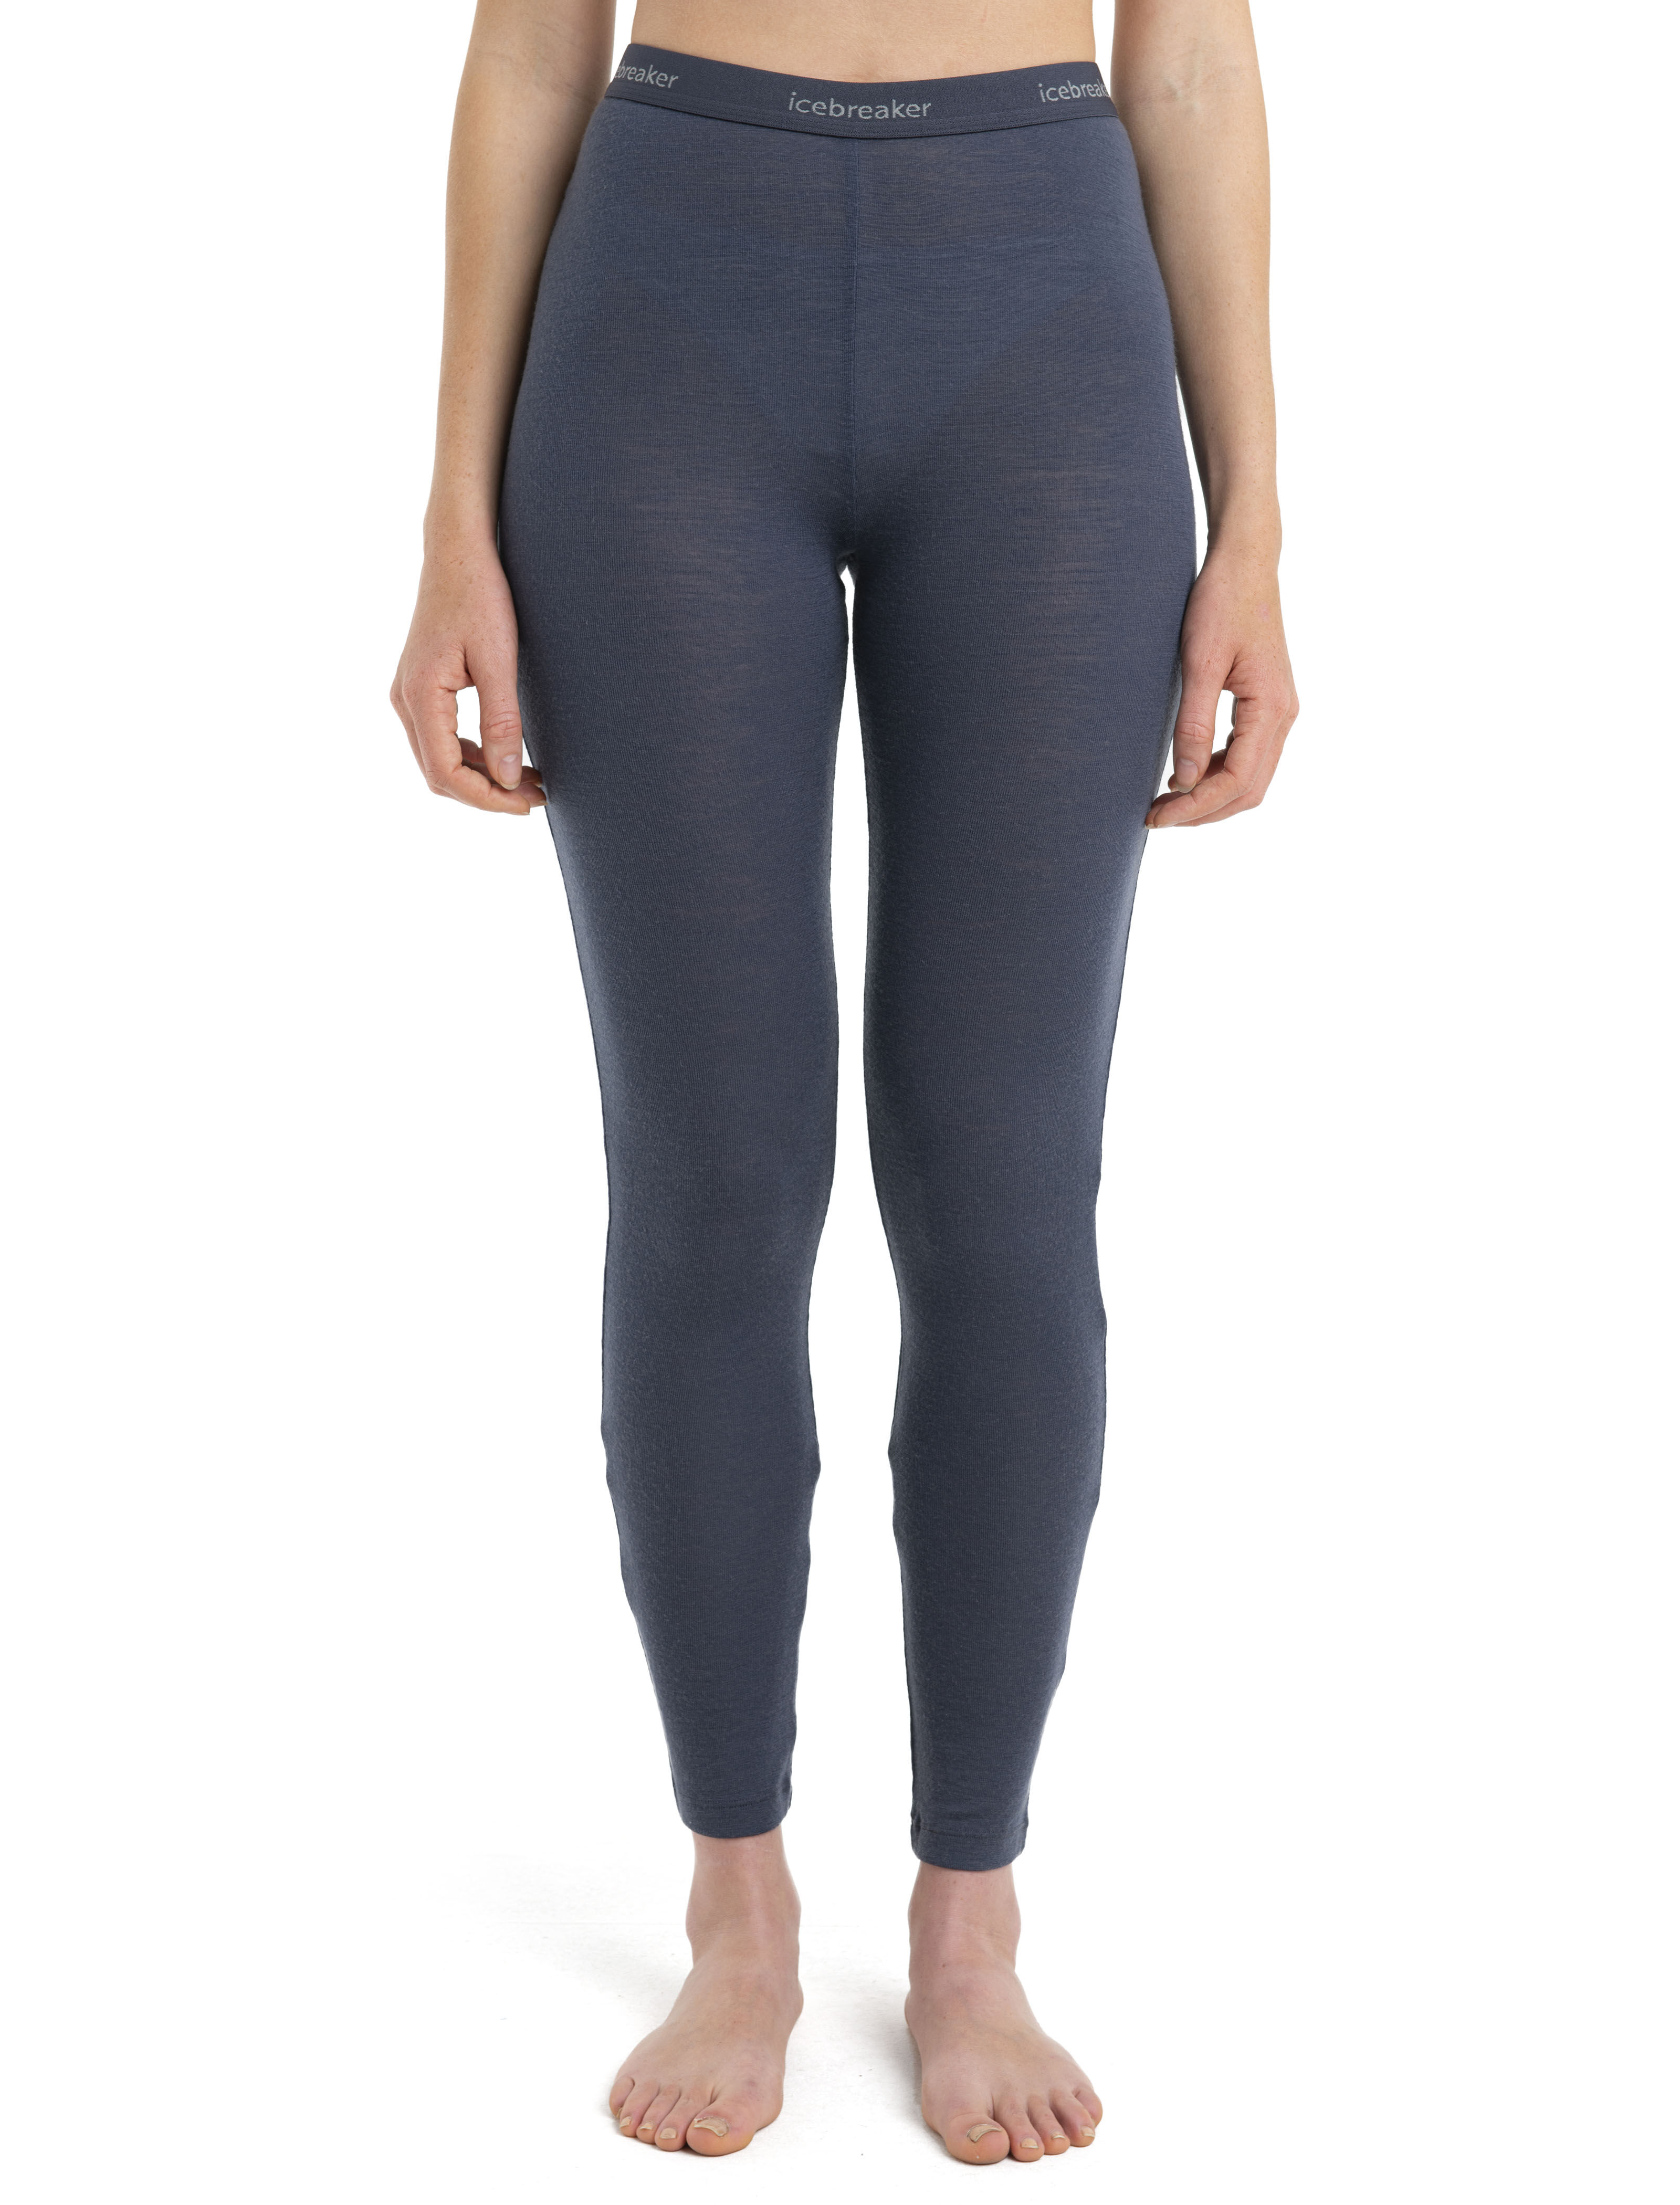 Why You NEED Thermal Leggings This Winter | Lorna Jane USA